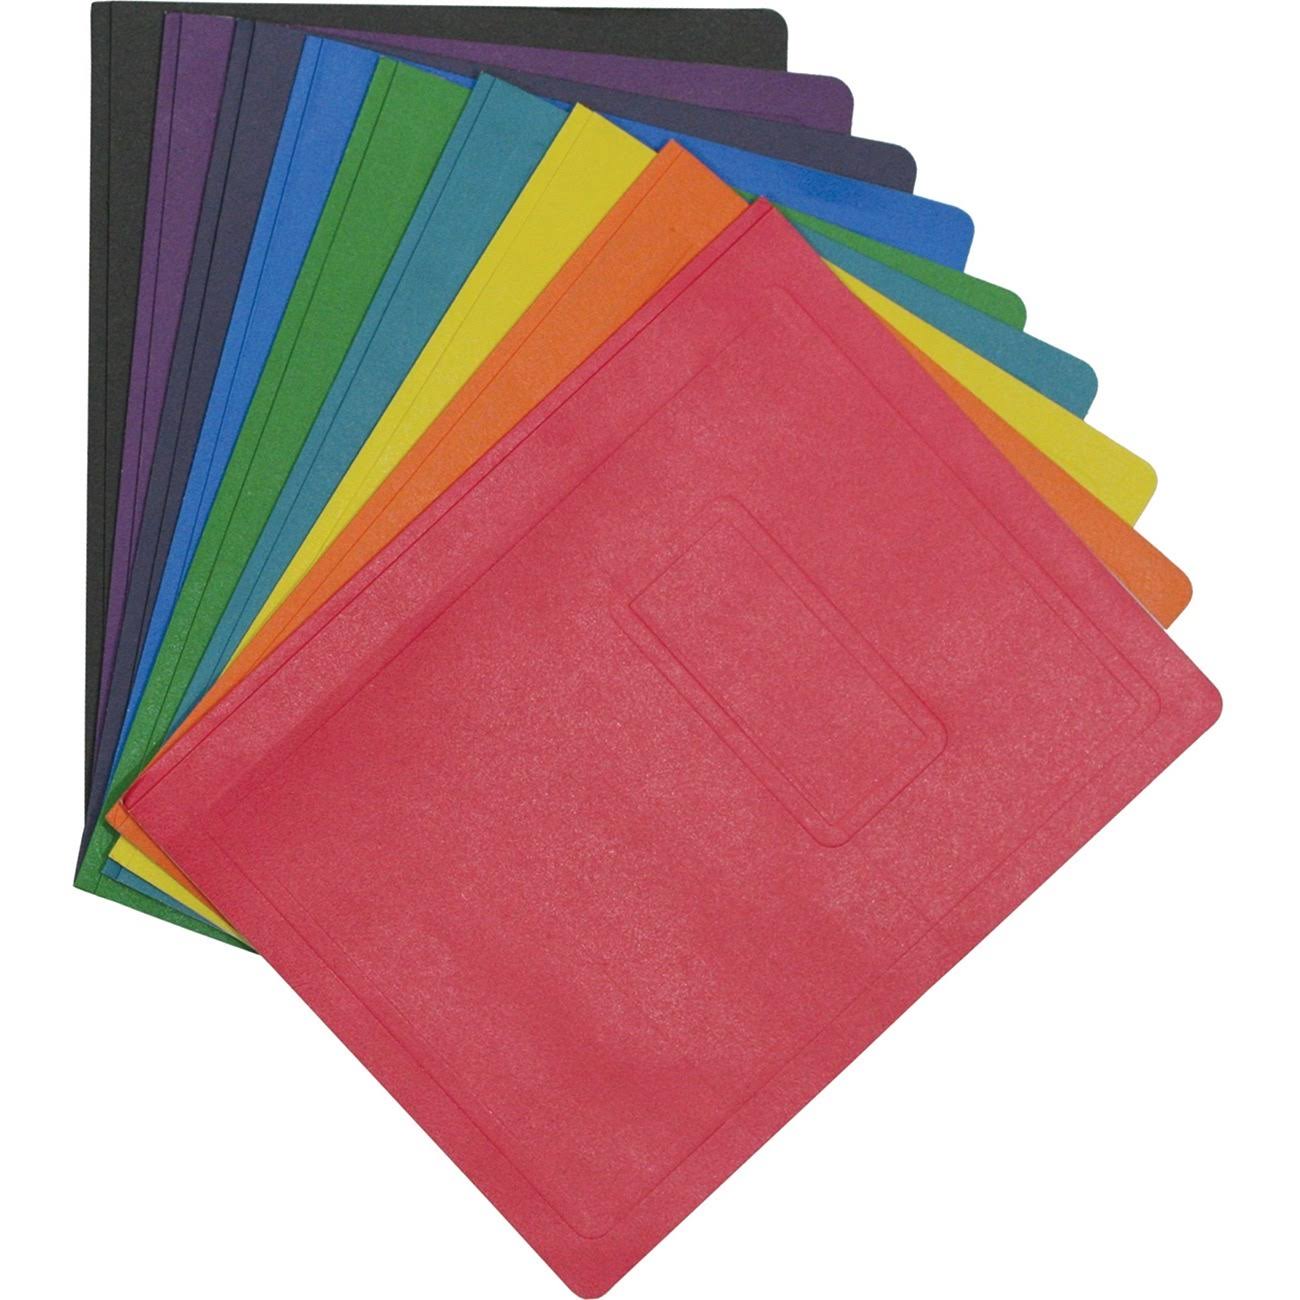 Hilroy Report Cover Assorted with Three Prongs 1 ea